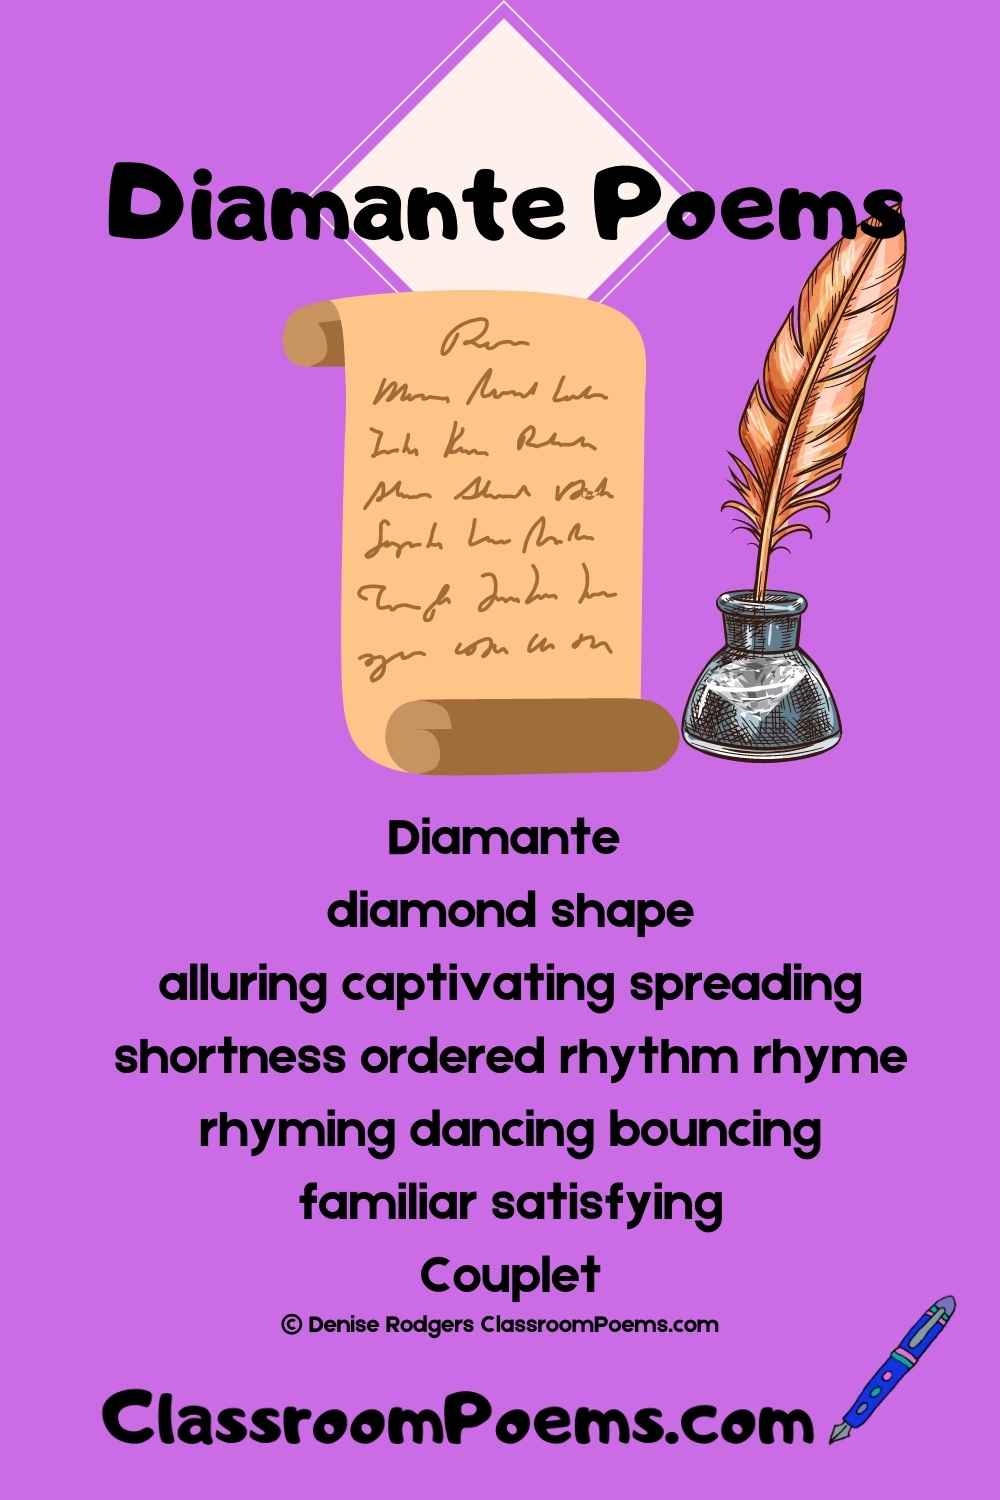 How to write a Diamante poem by Denise Rodgers on ClassroomPoems.com.